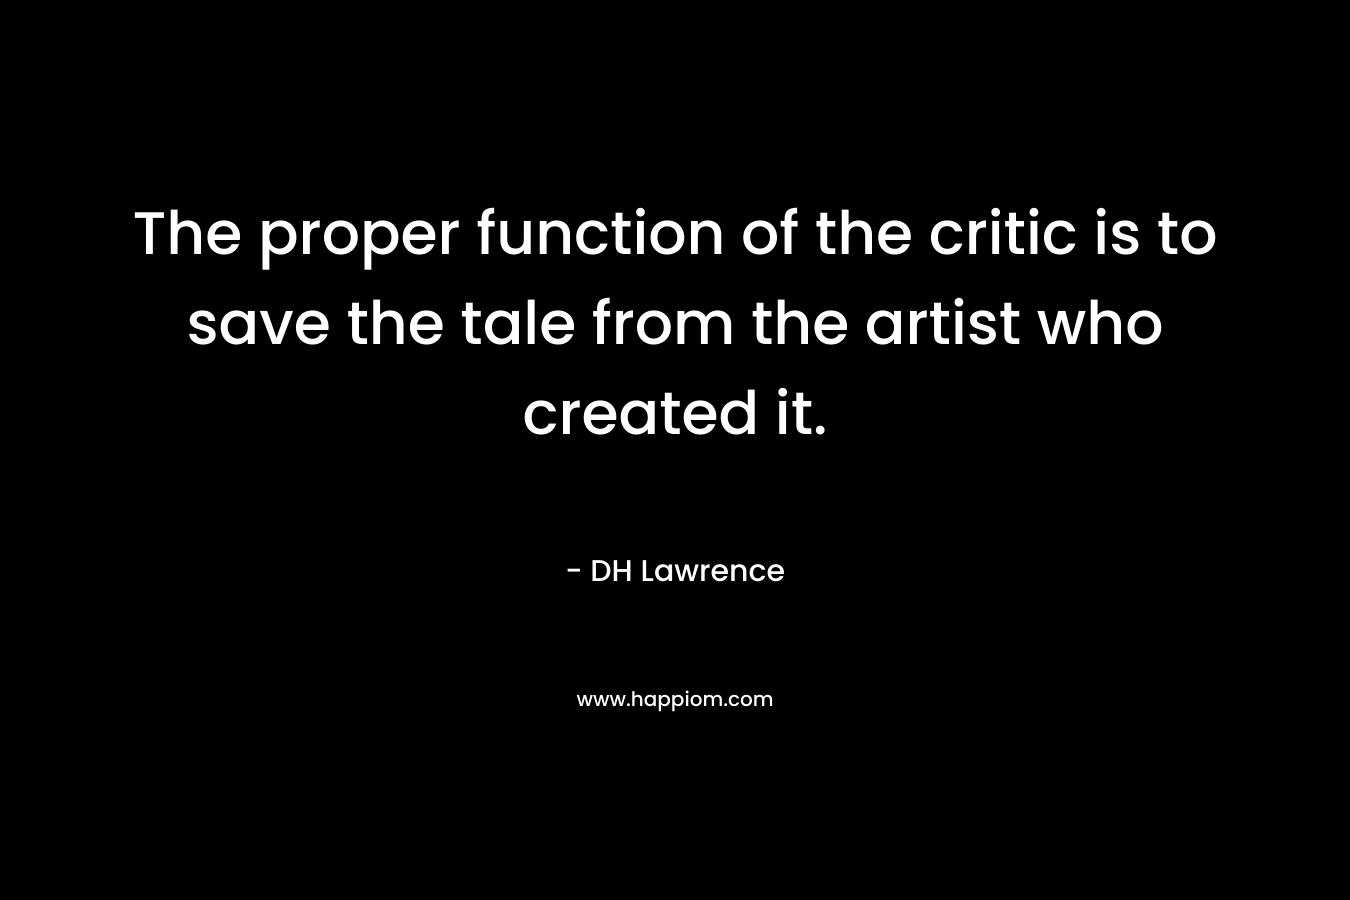 The proper function of the critic is to save the tale from the artist who created it.